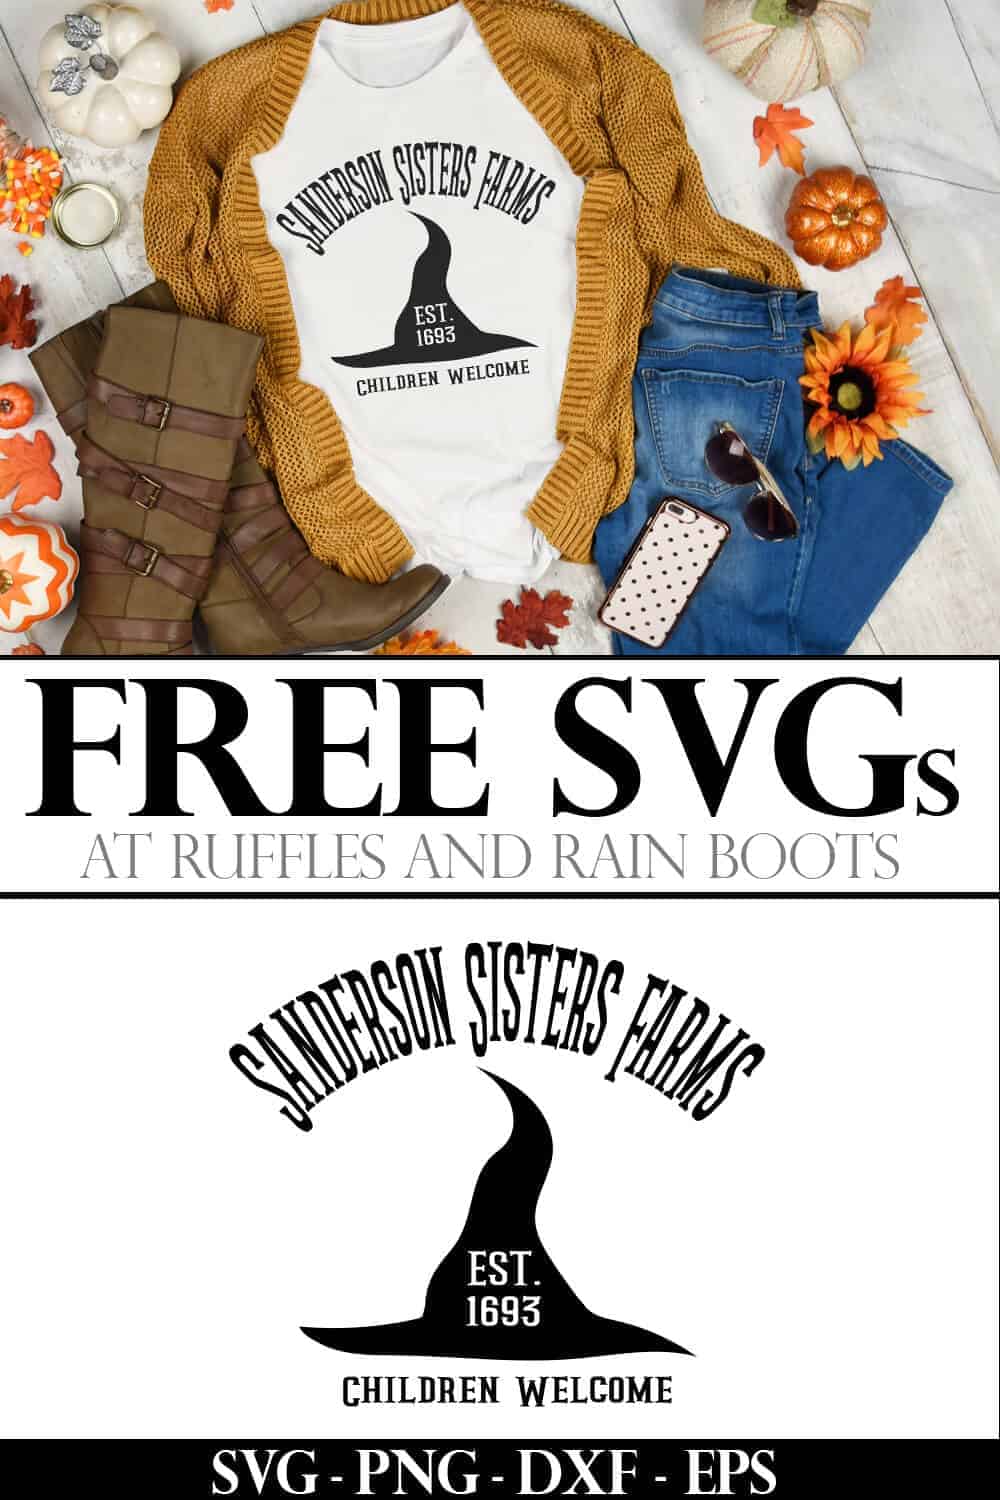 Sanderson Sisters farm Hocus Pocus svg placed on white tshirt with fall background with text which reads free svgs at ruffles and rain boots